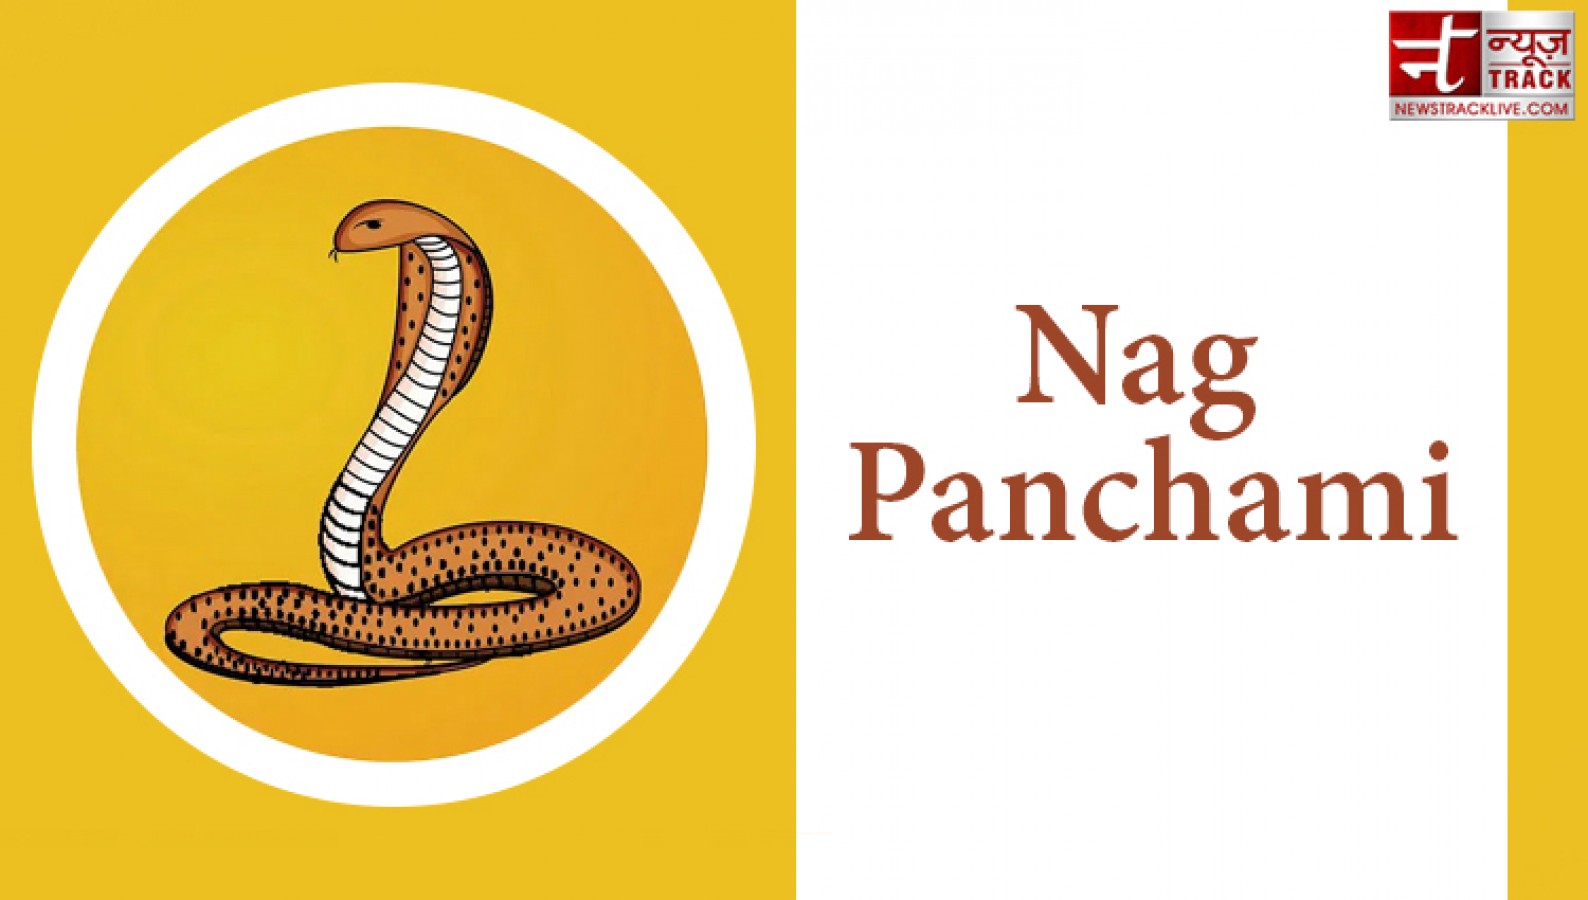 How to draw snake,snake drawing,Nagpanchami related drawing. - YouTube